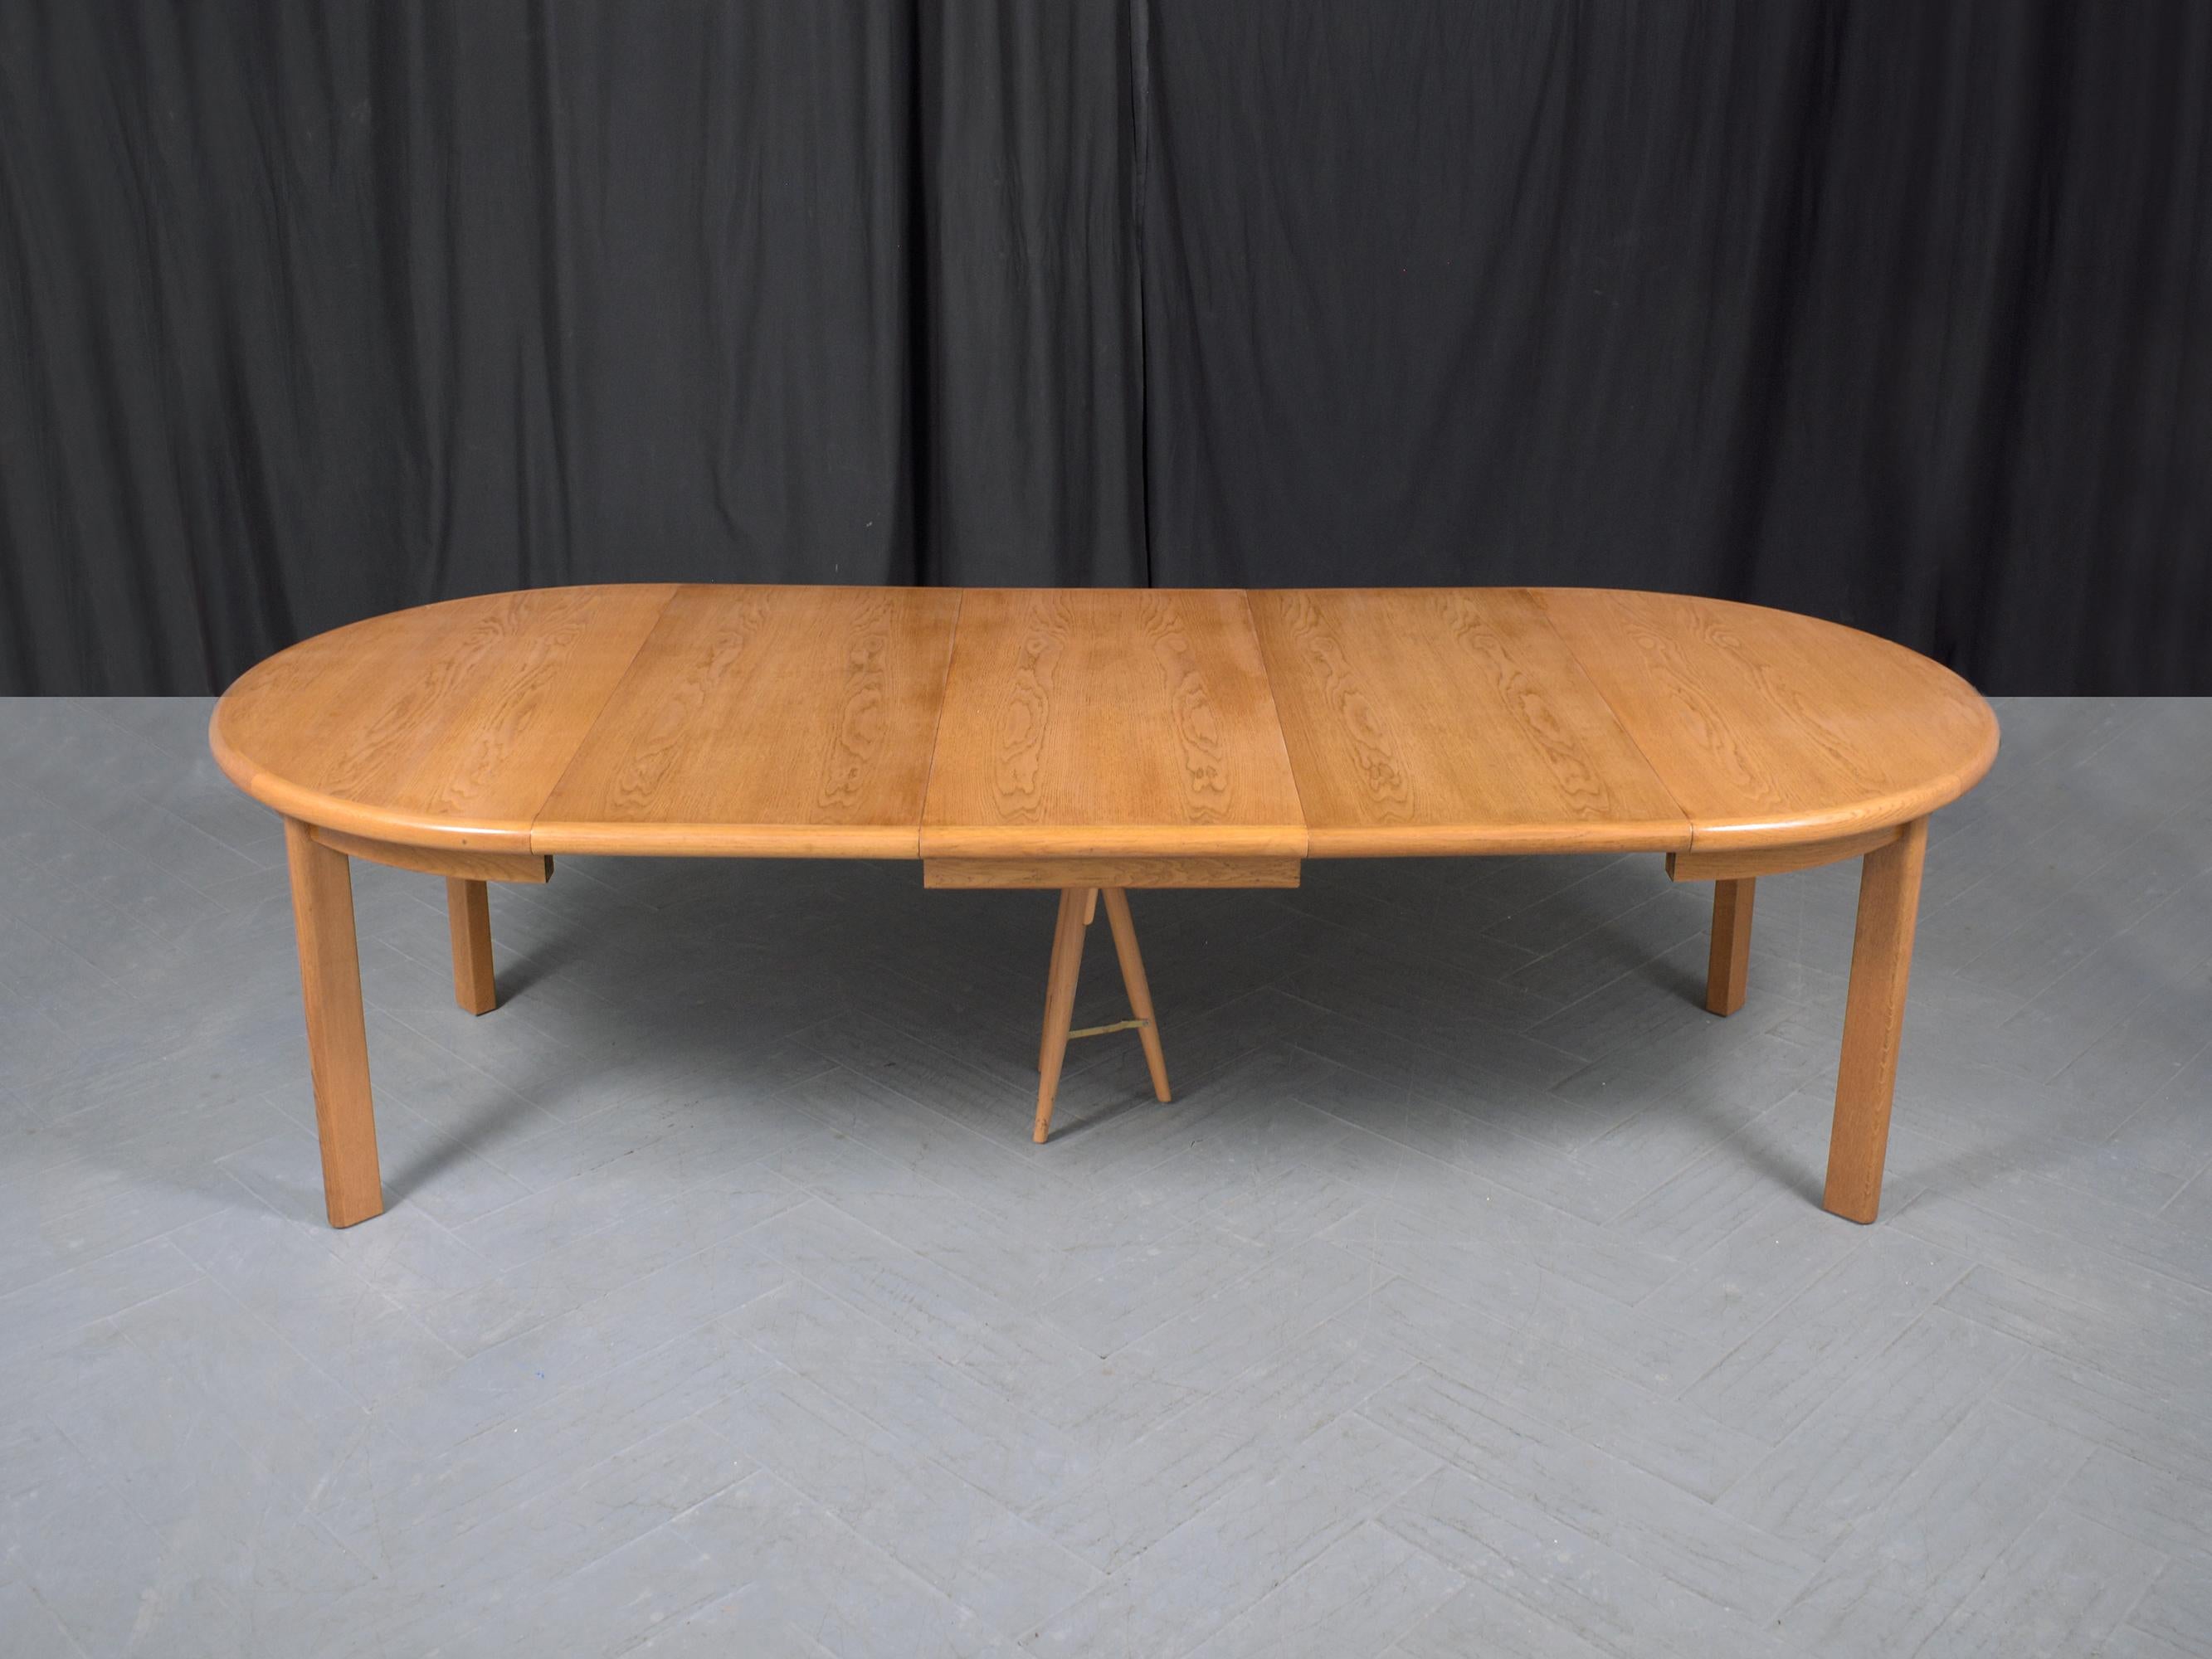 1970s Danish Modern Teak Dining Table with Extendable Leaves For Sale 1